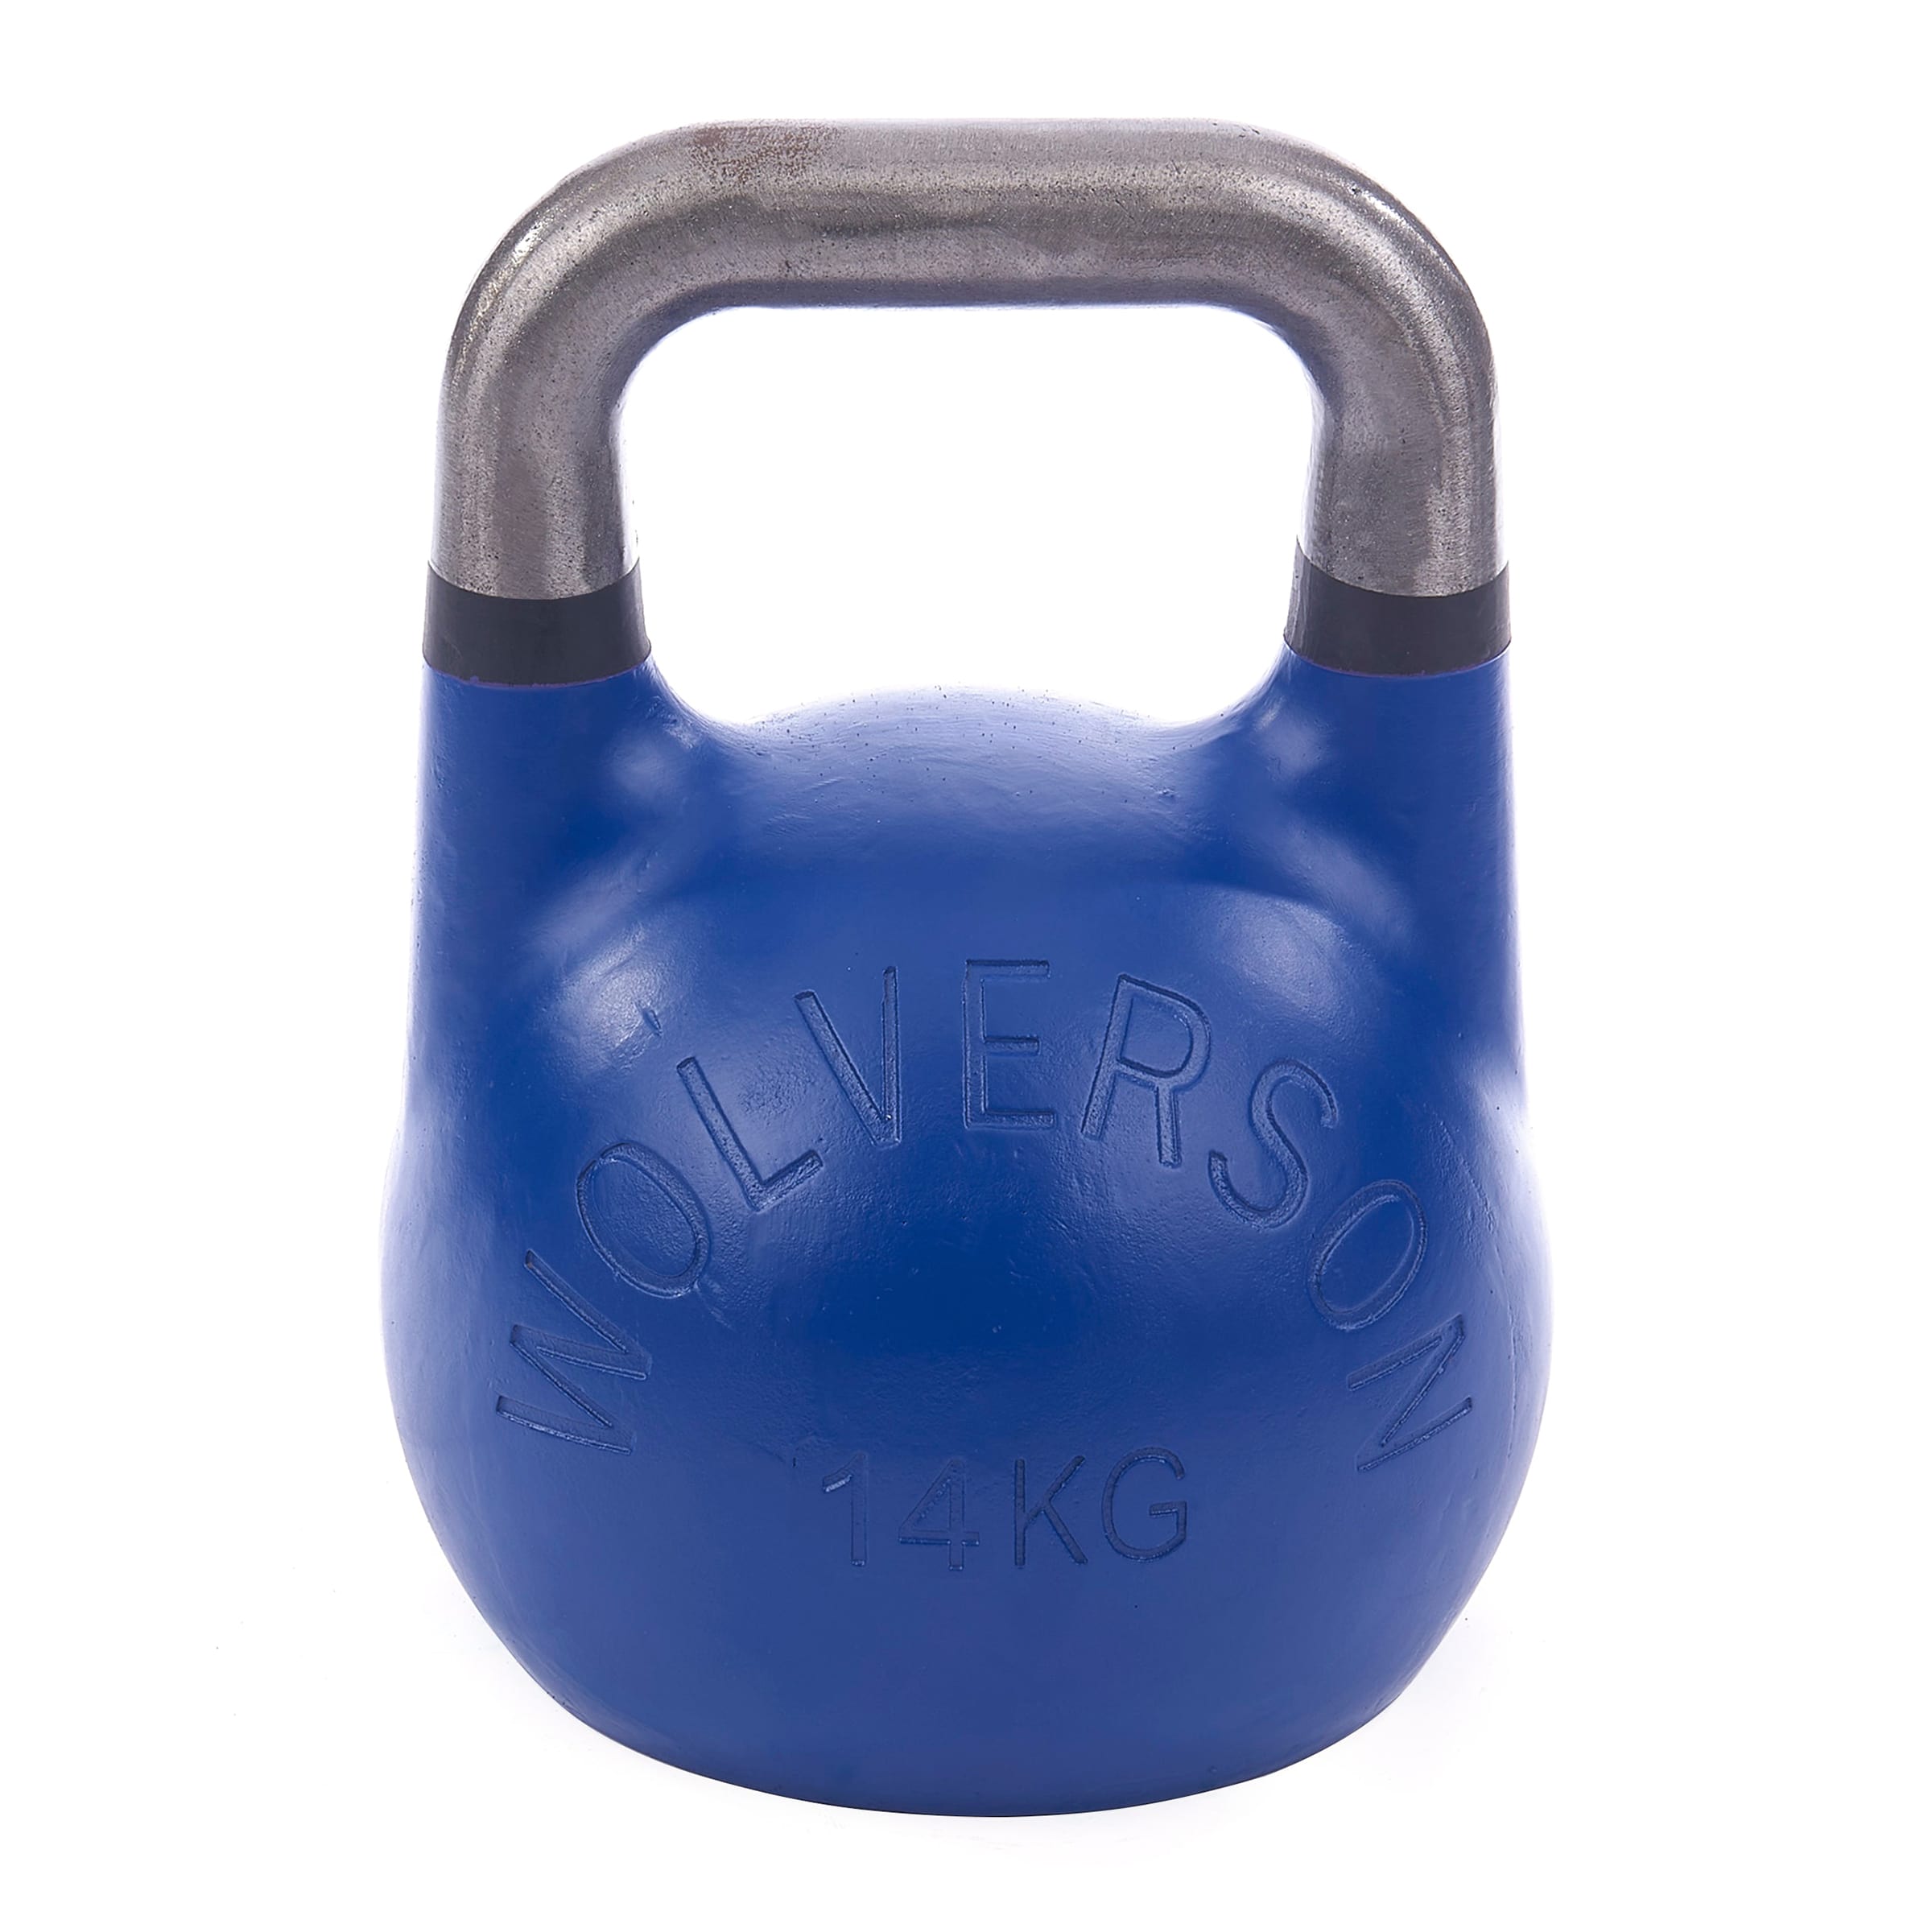 Wolverson Competition Kettlebells - Wolverson Fitness